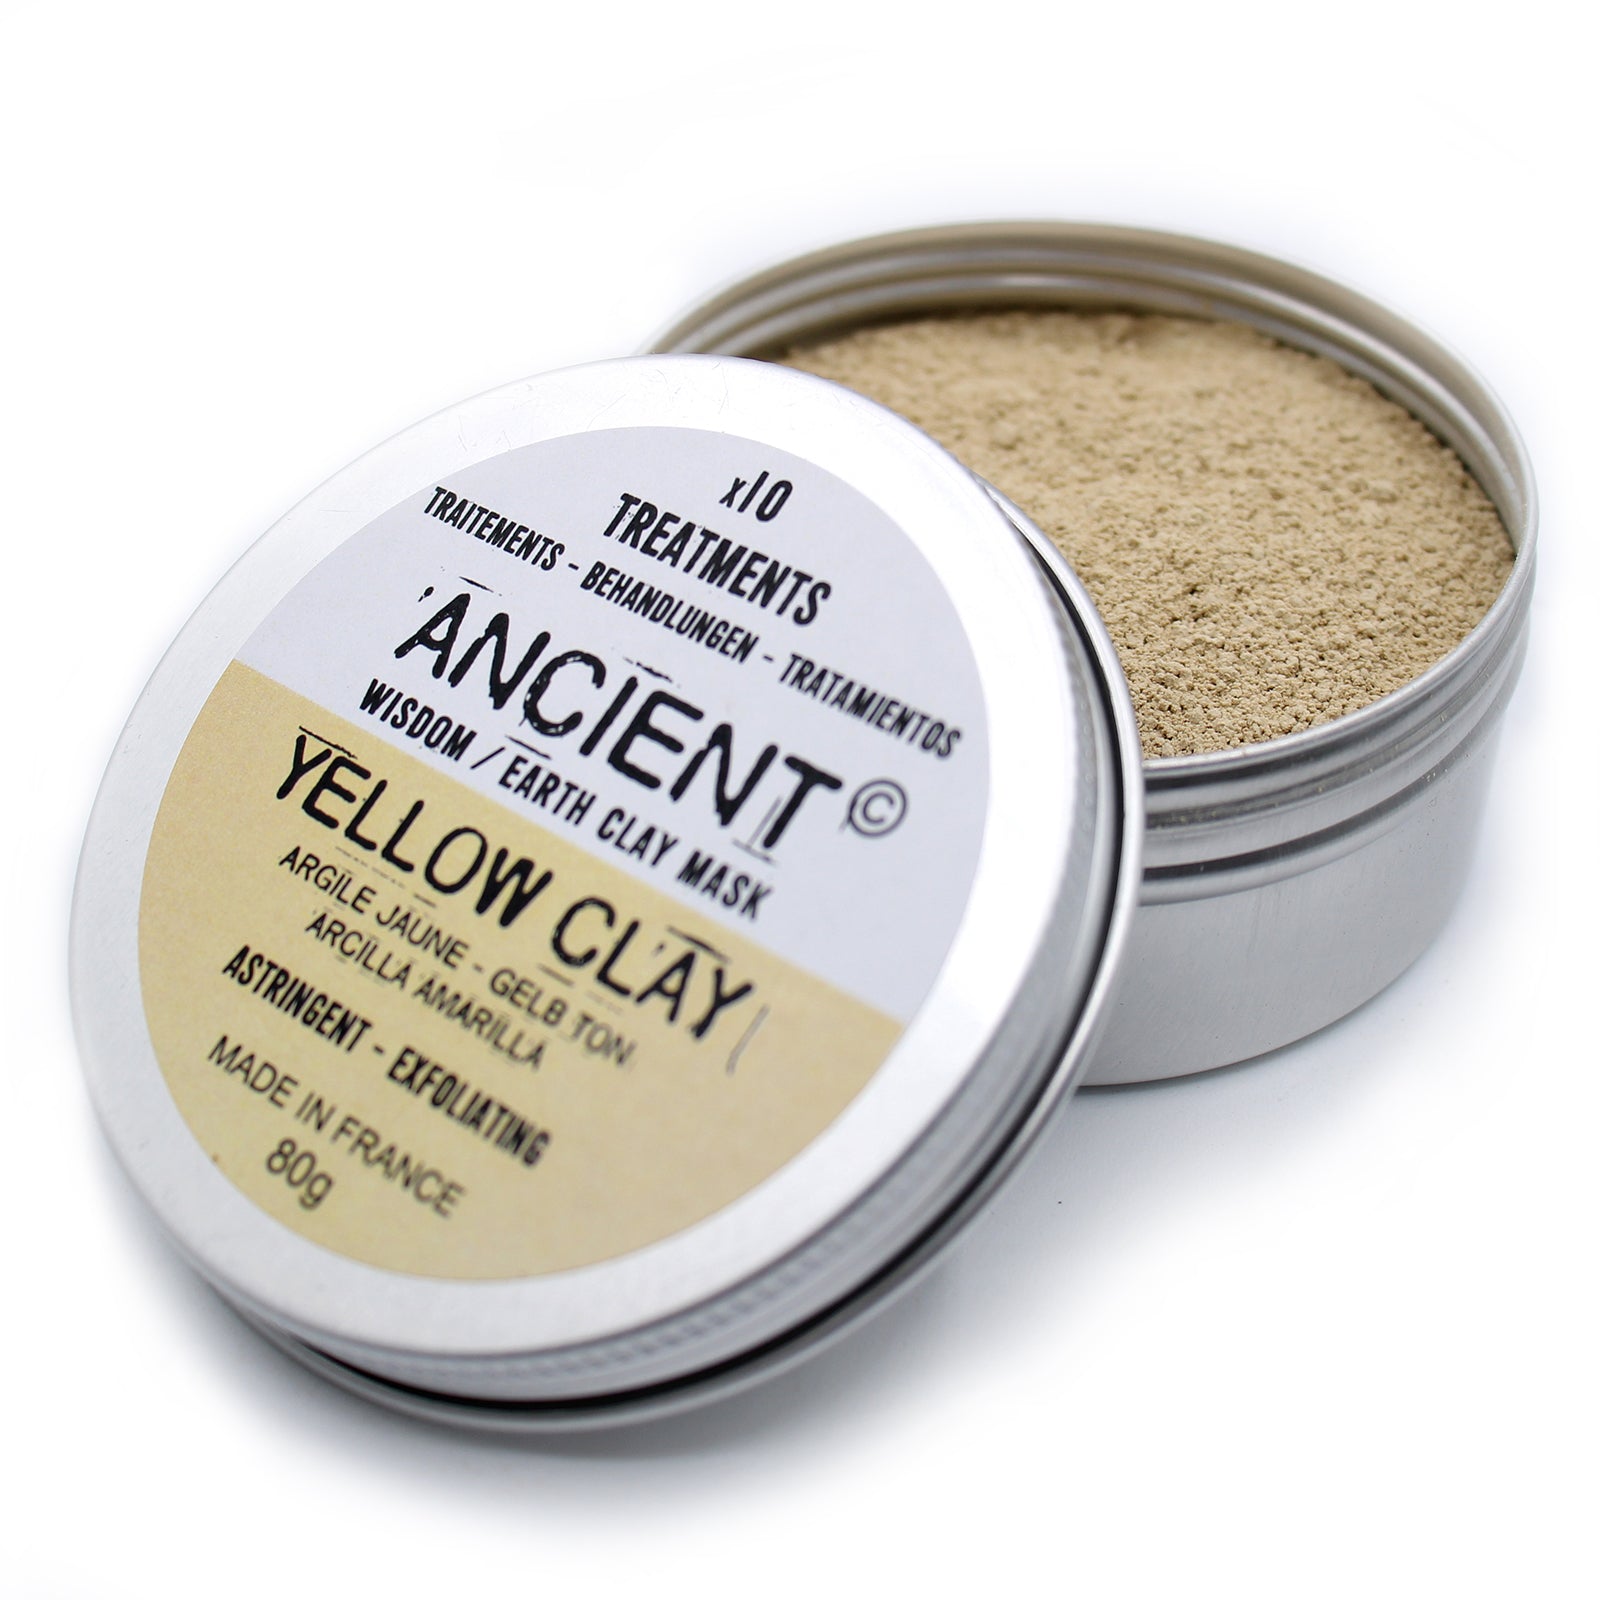 View Yellow Clay 80g information